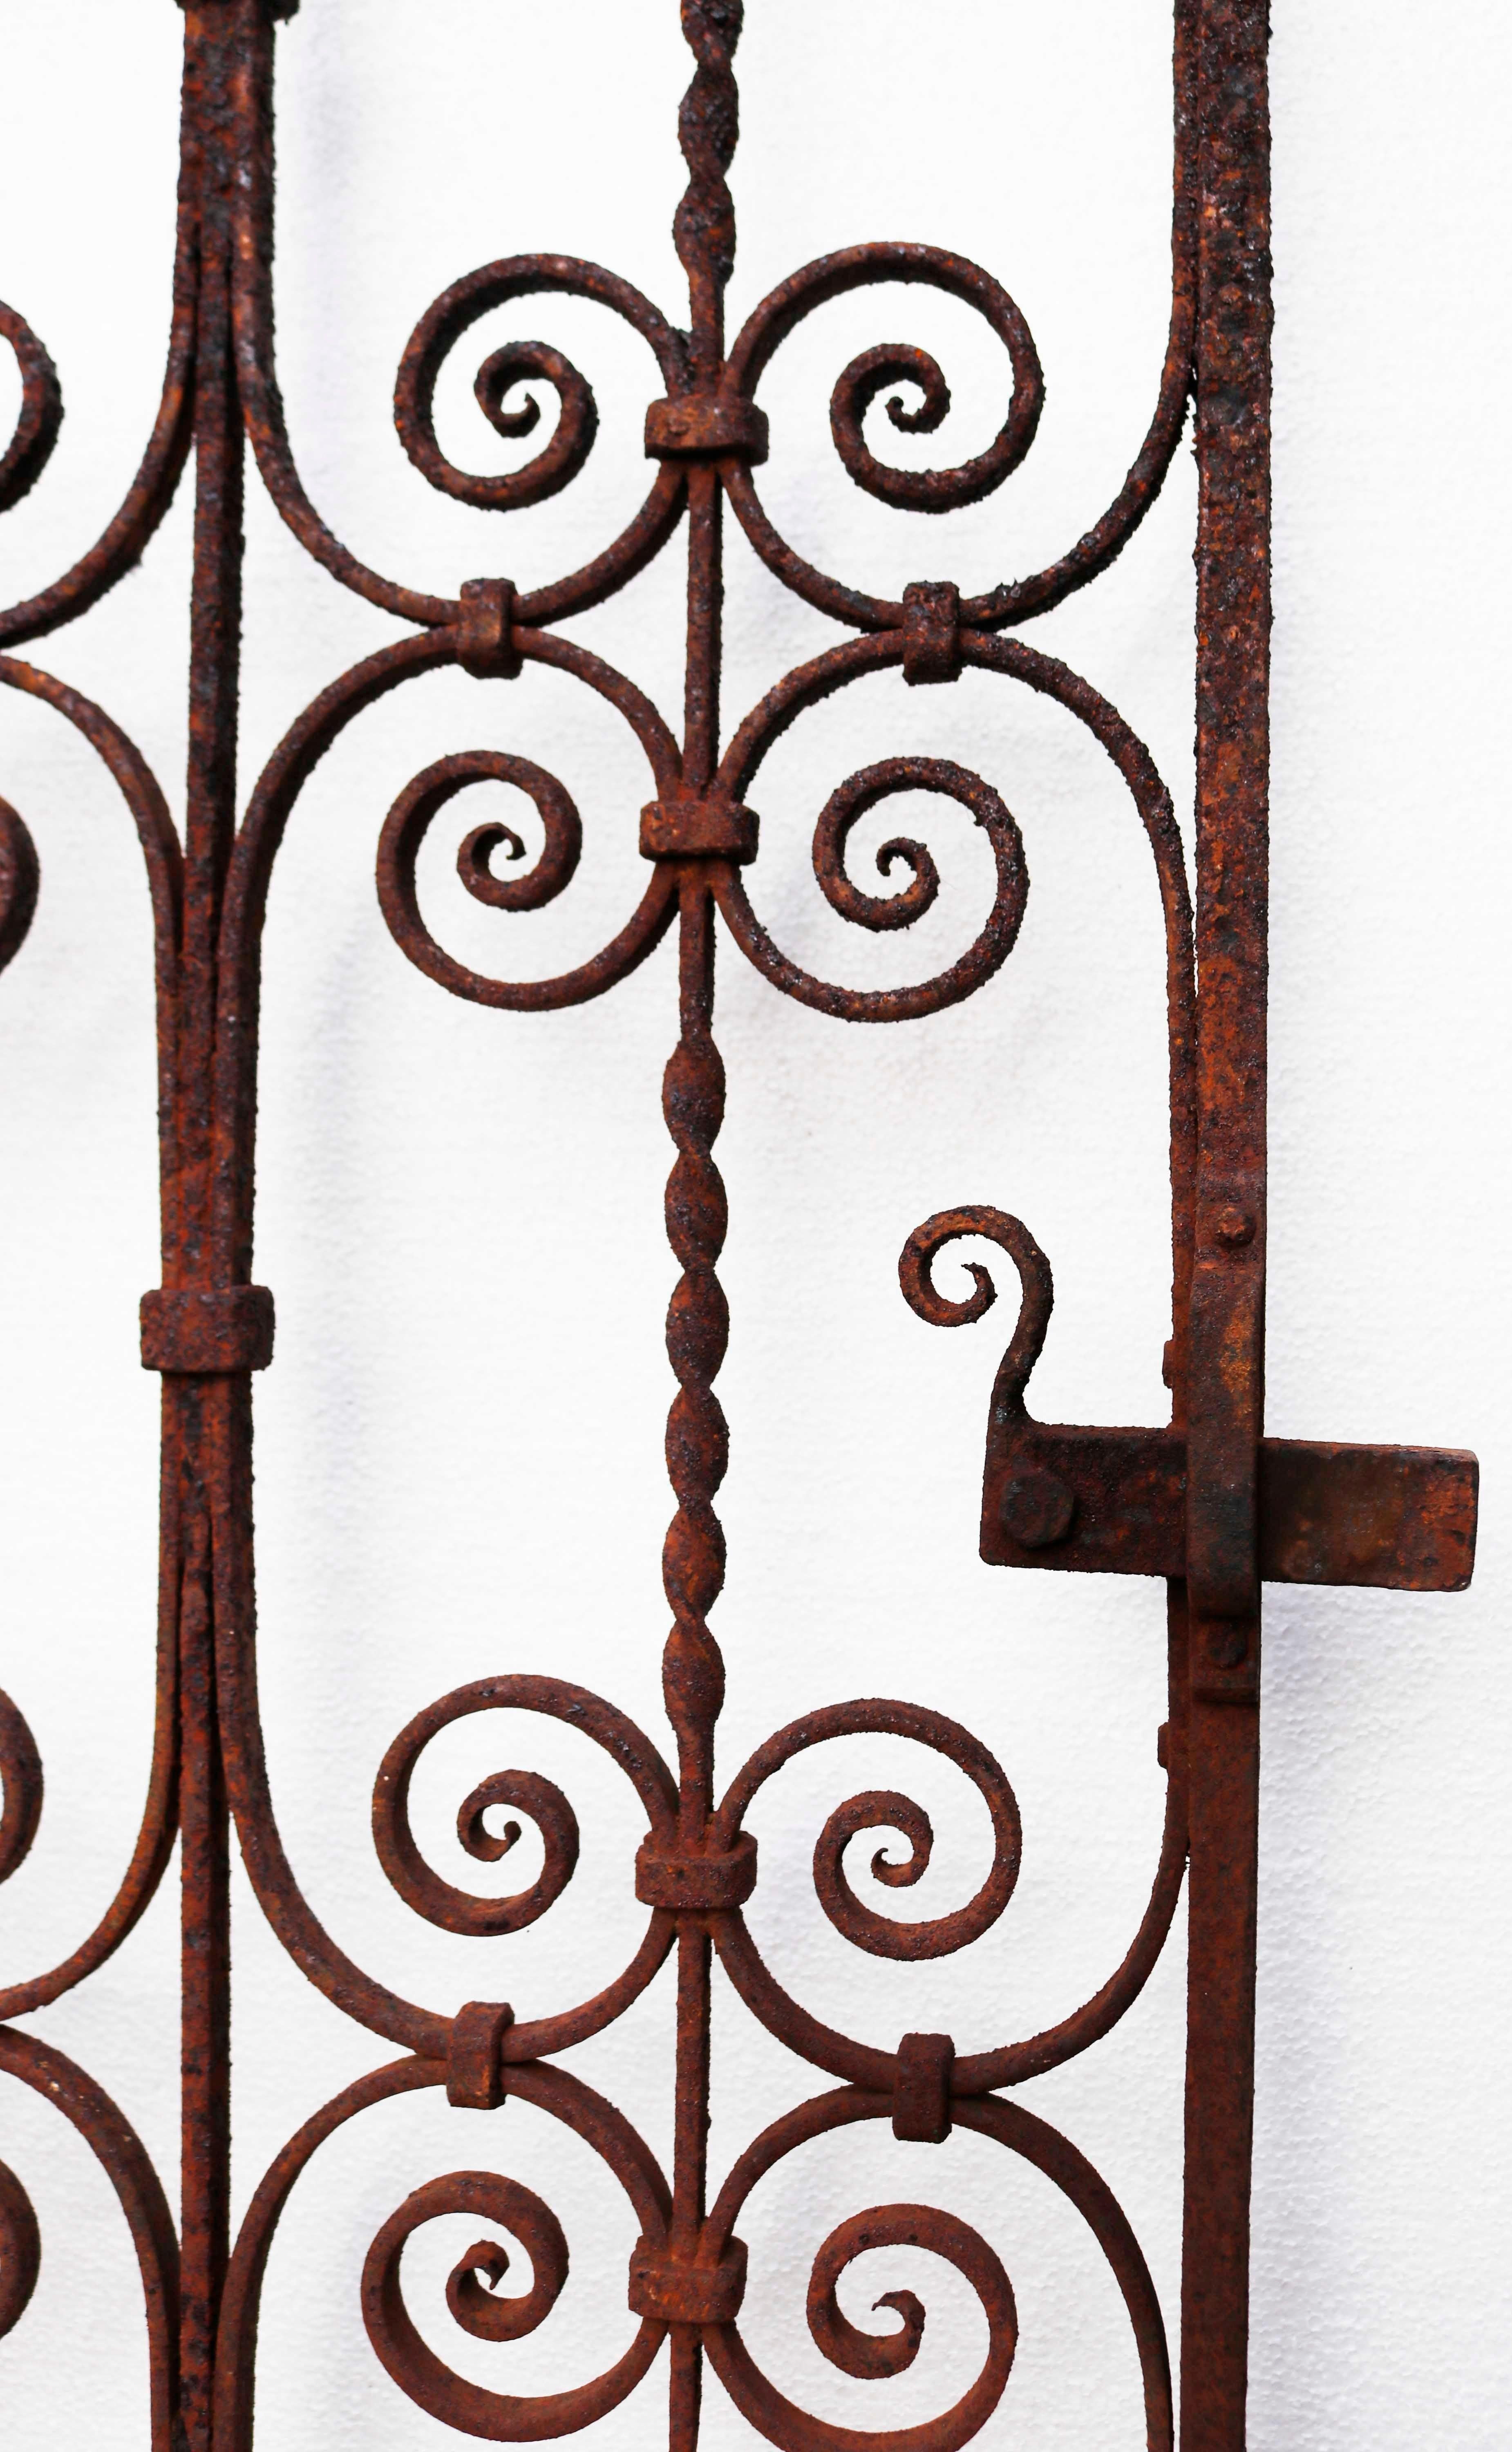 Antique scroll work wrought iron gate. An impressive garden gate with detailed scroll work throughout.



What is wrought iron?

Wrought iron is a type of refined, low carbon iron that is smelted and worked on with tools. The term wrought iron